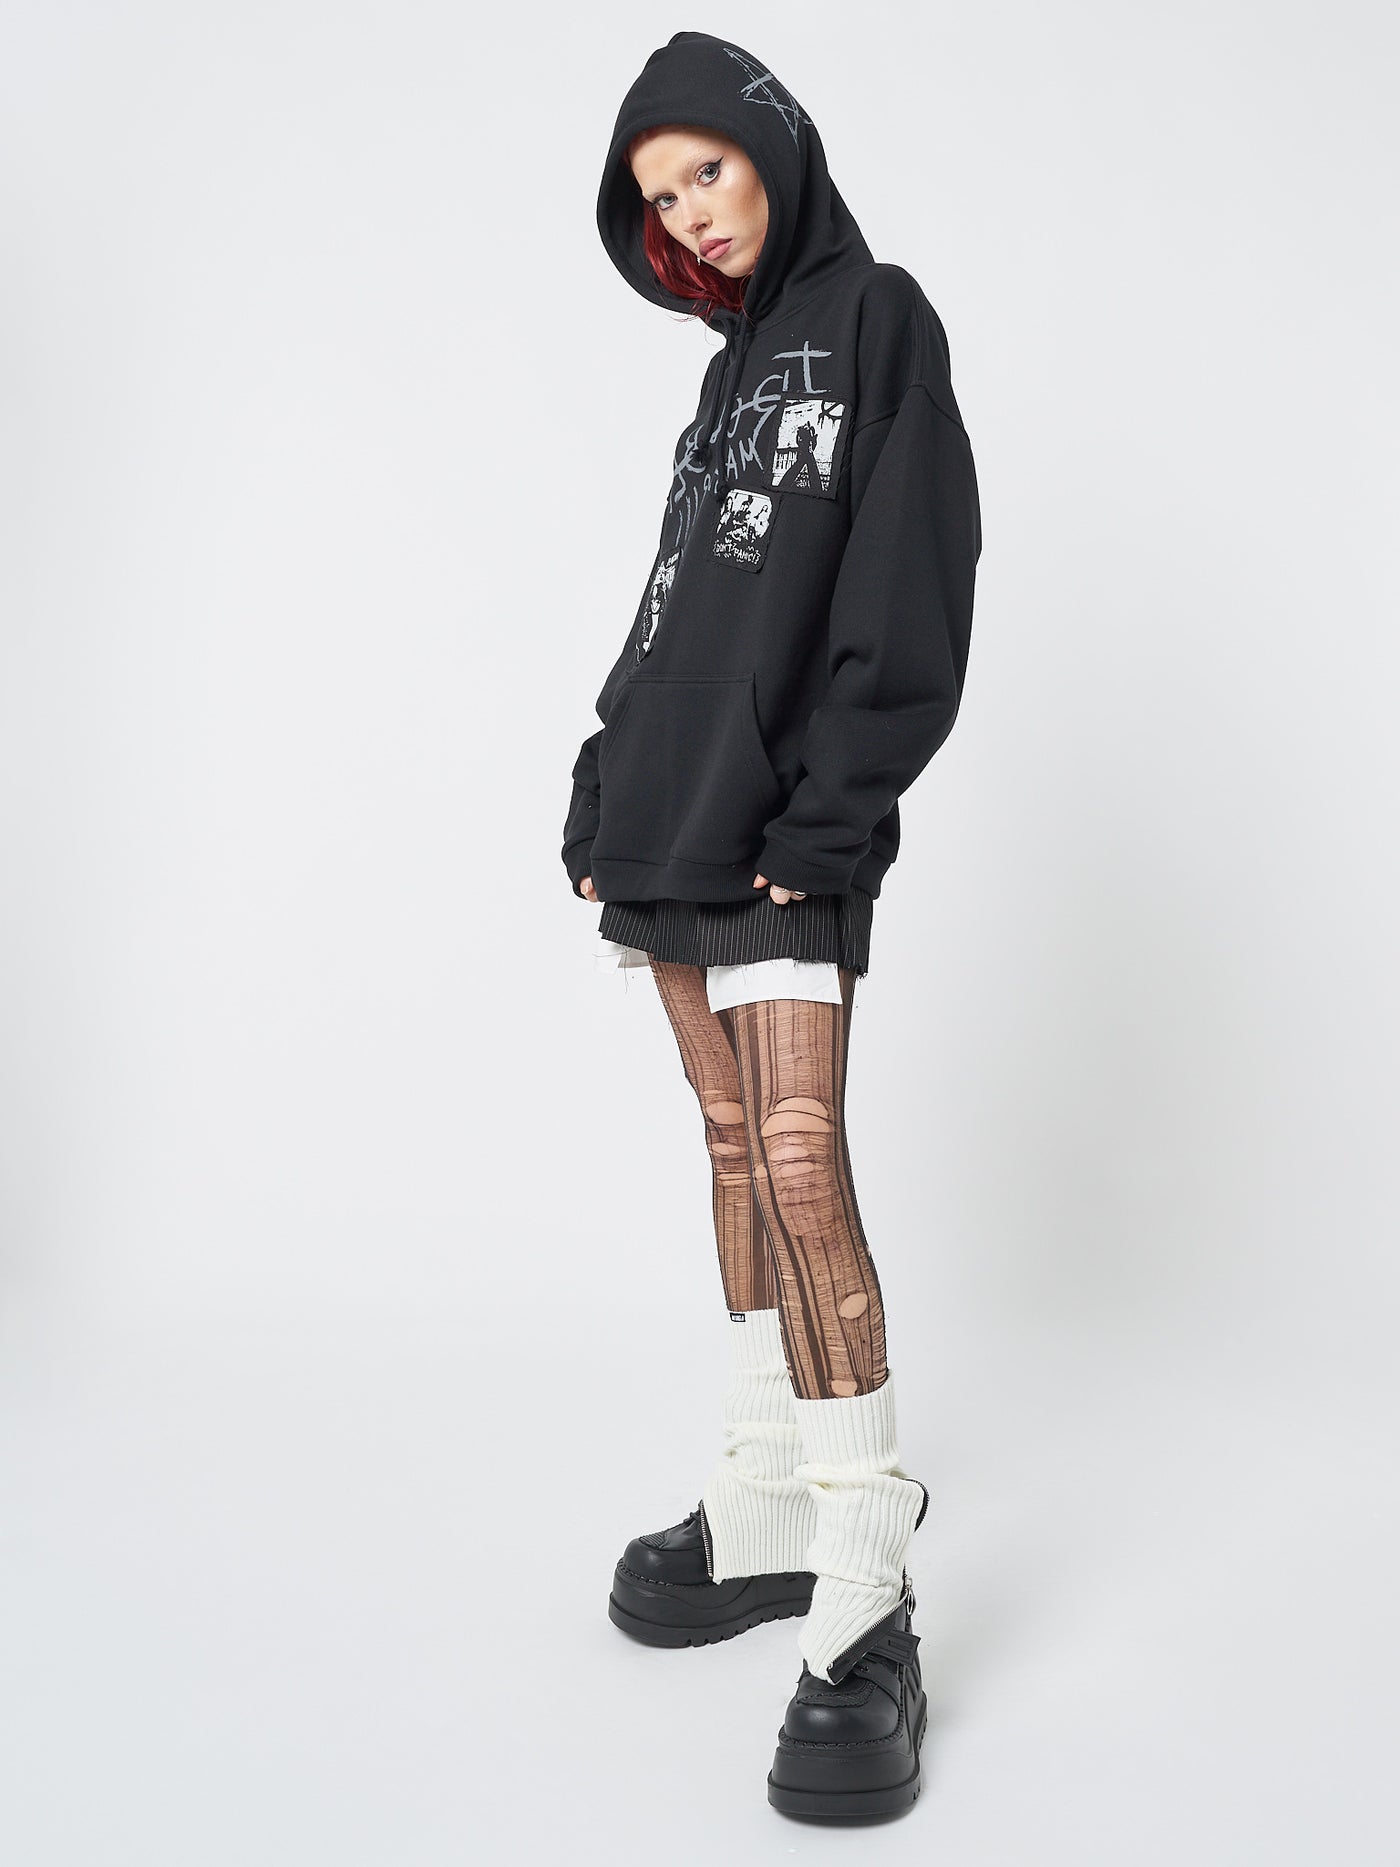 Troublemaker Patches Black Hoodie - Minga London